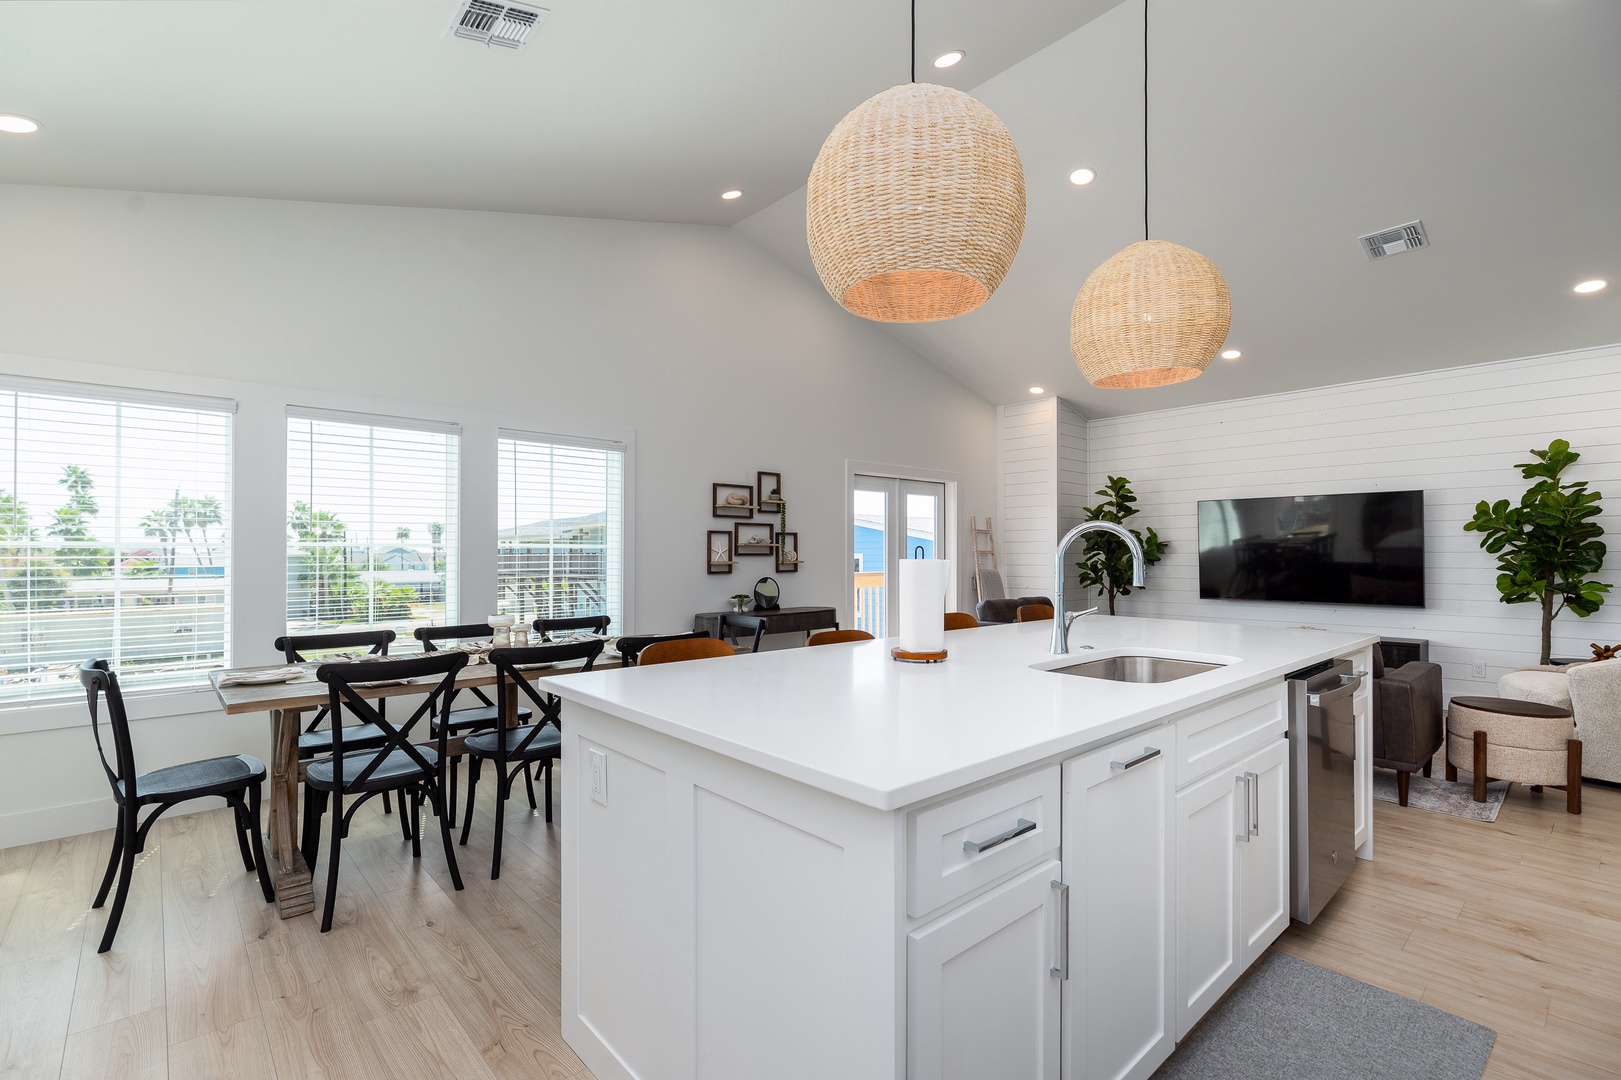 The airy kitchen offers loads of counter space & fabulous amenities